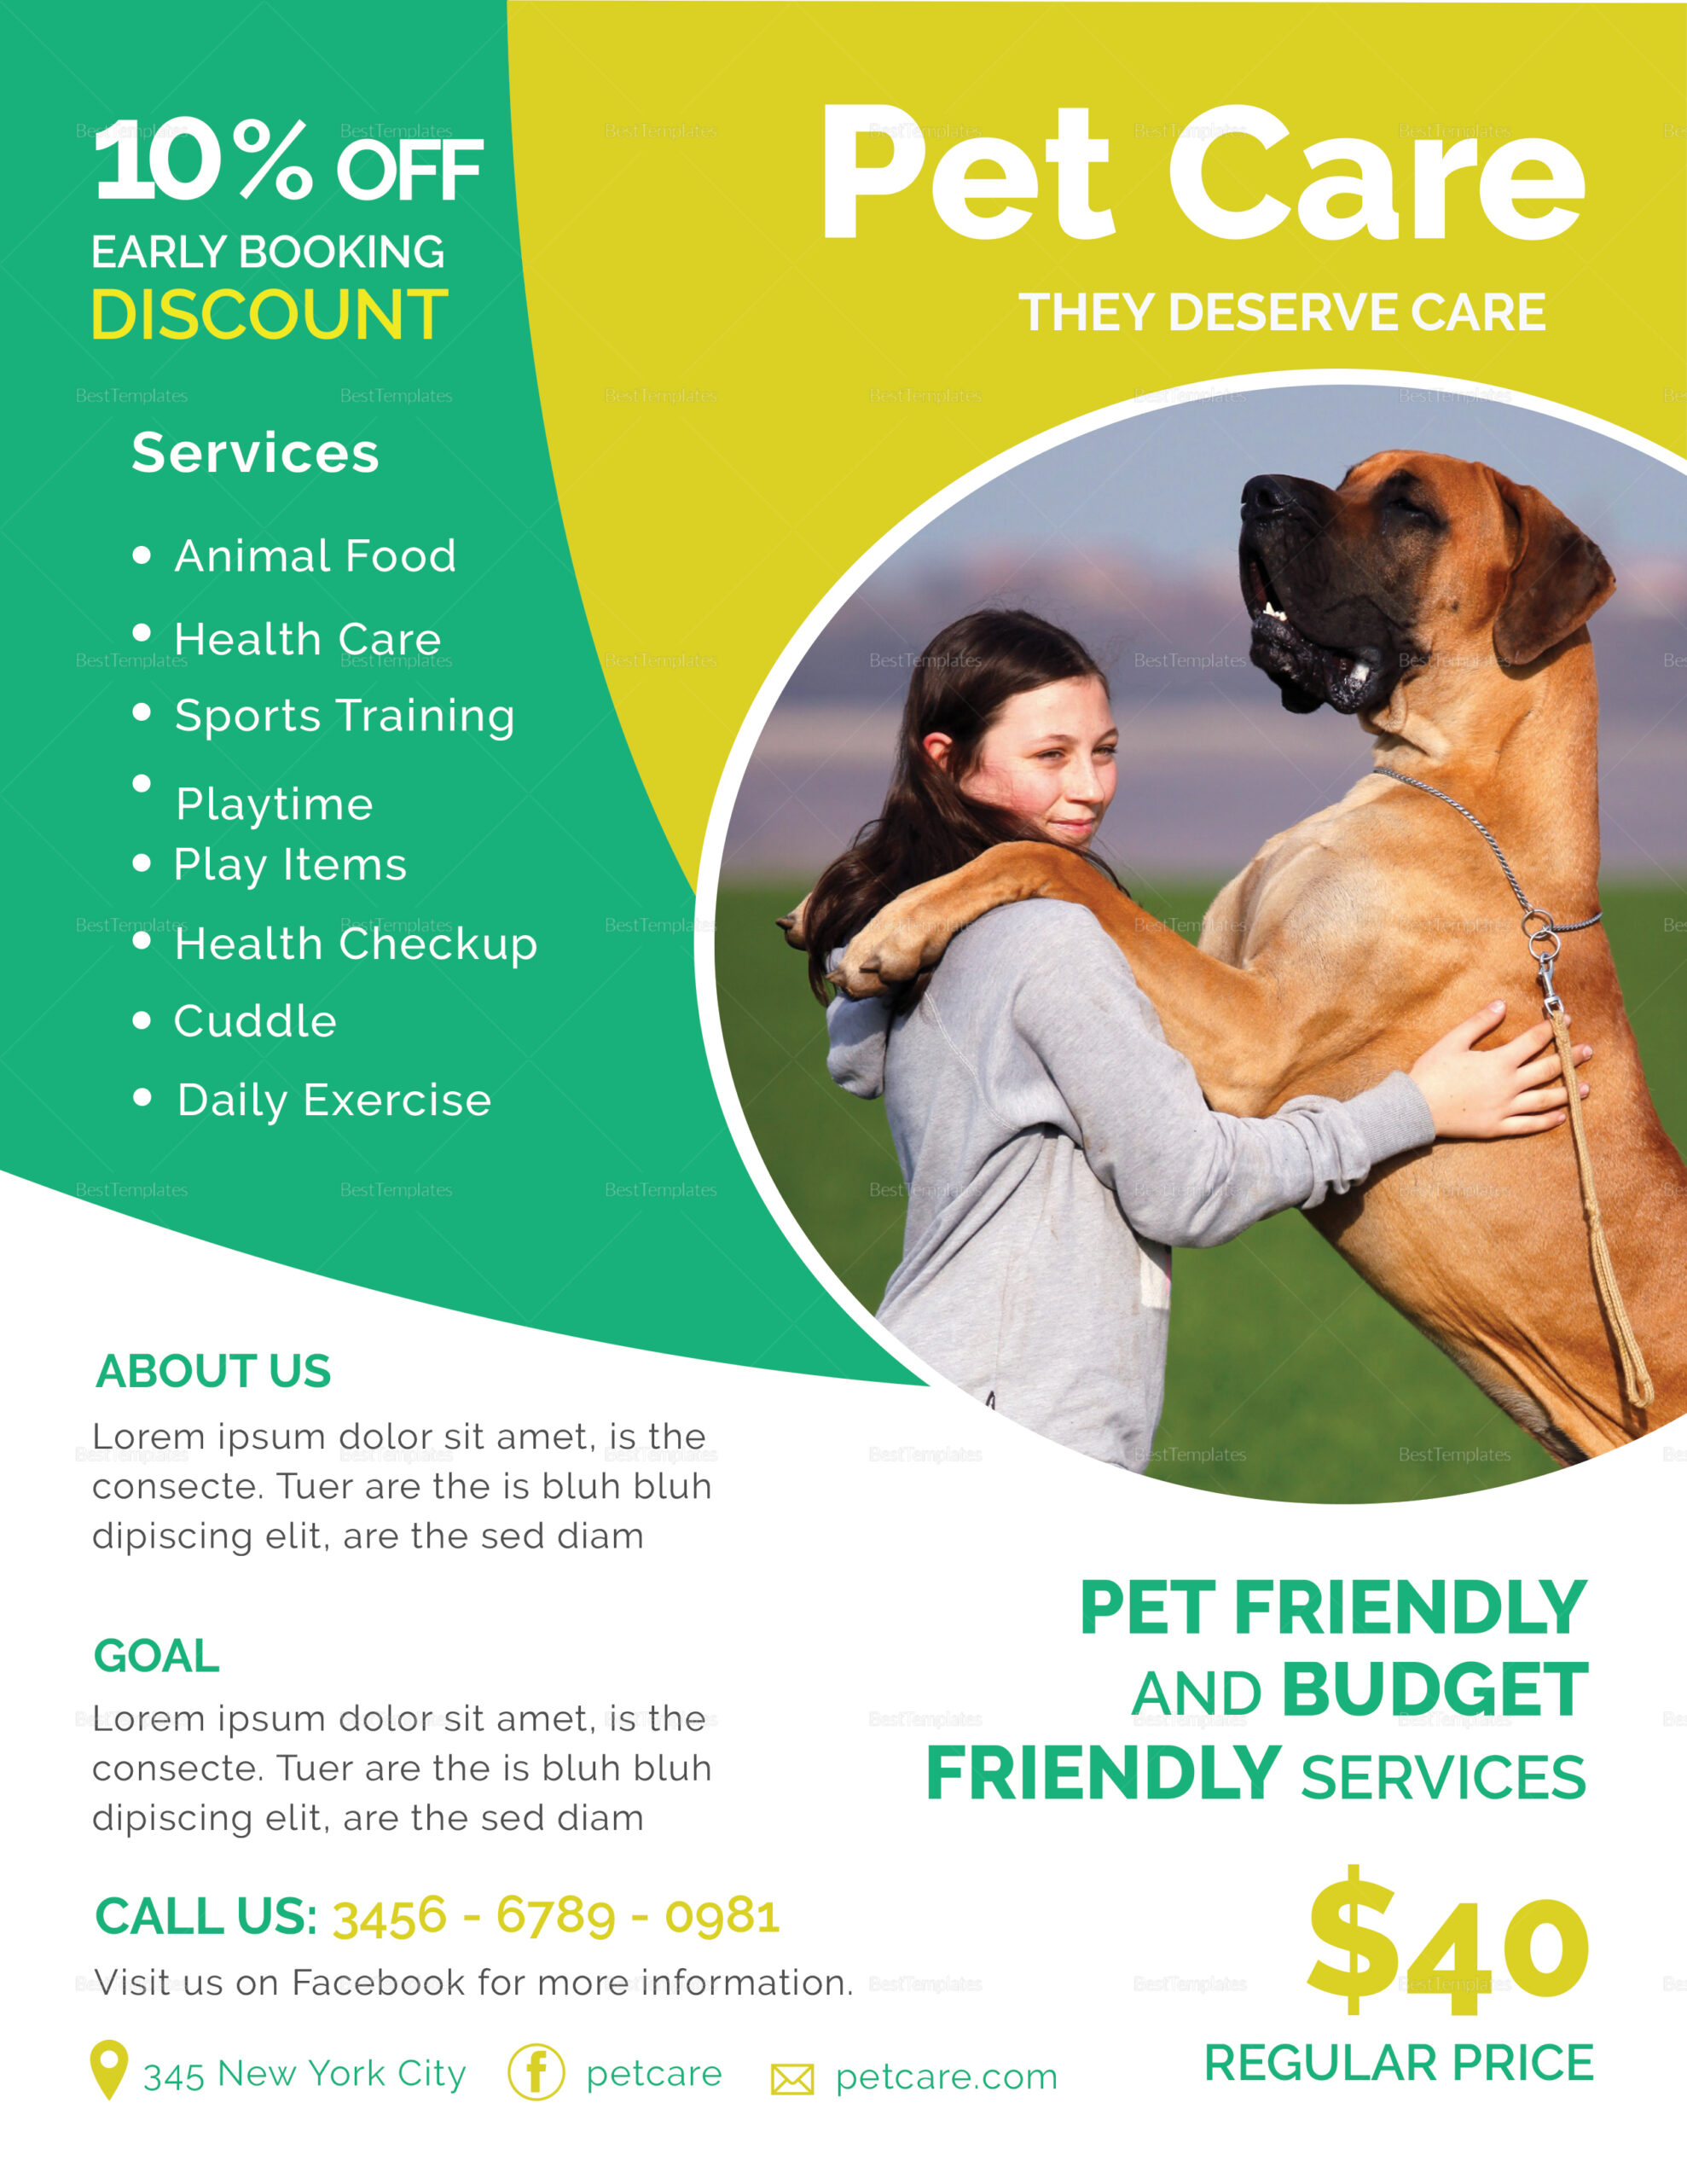 Pet Care Services Flyer Template Within Pet Care Flyer Template Throughout Pet Care Flyer Template